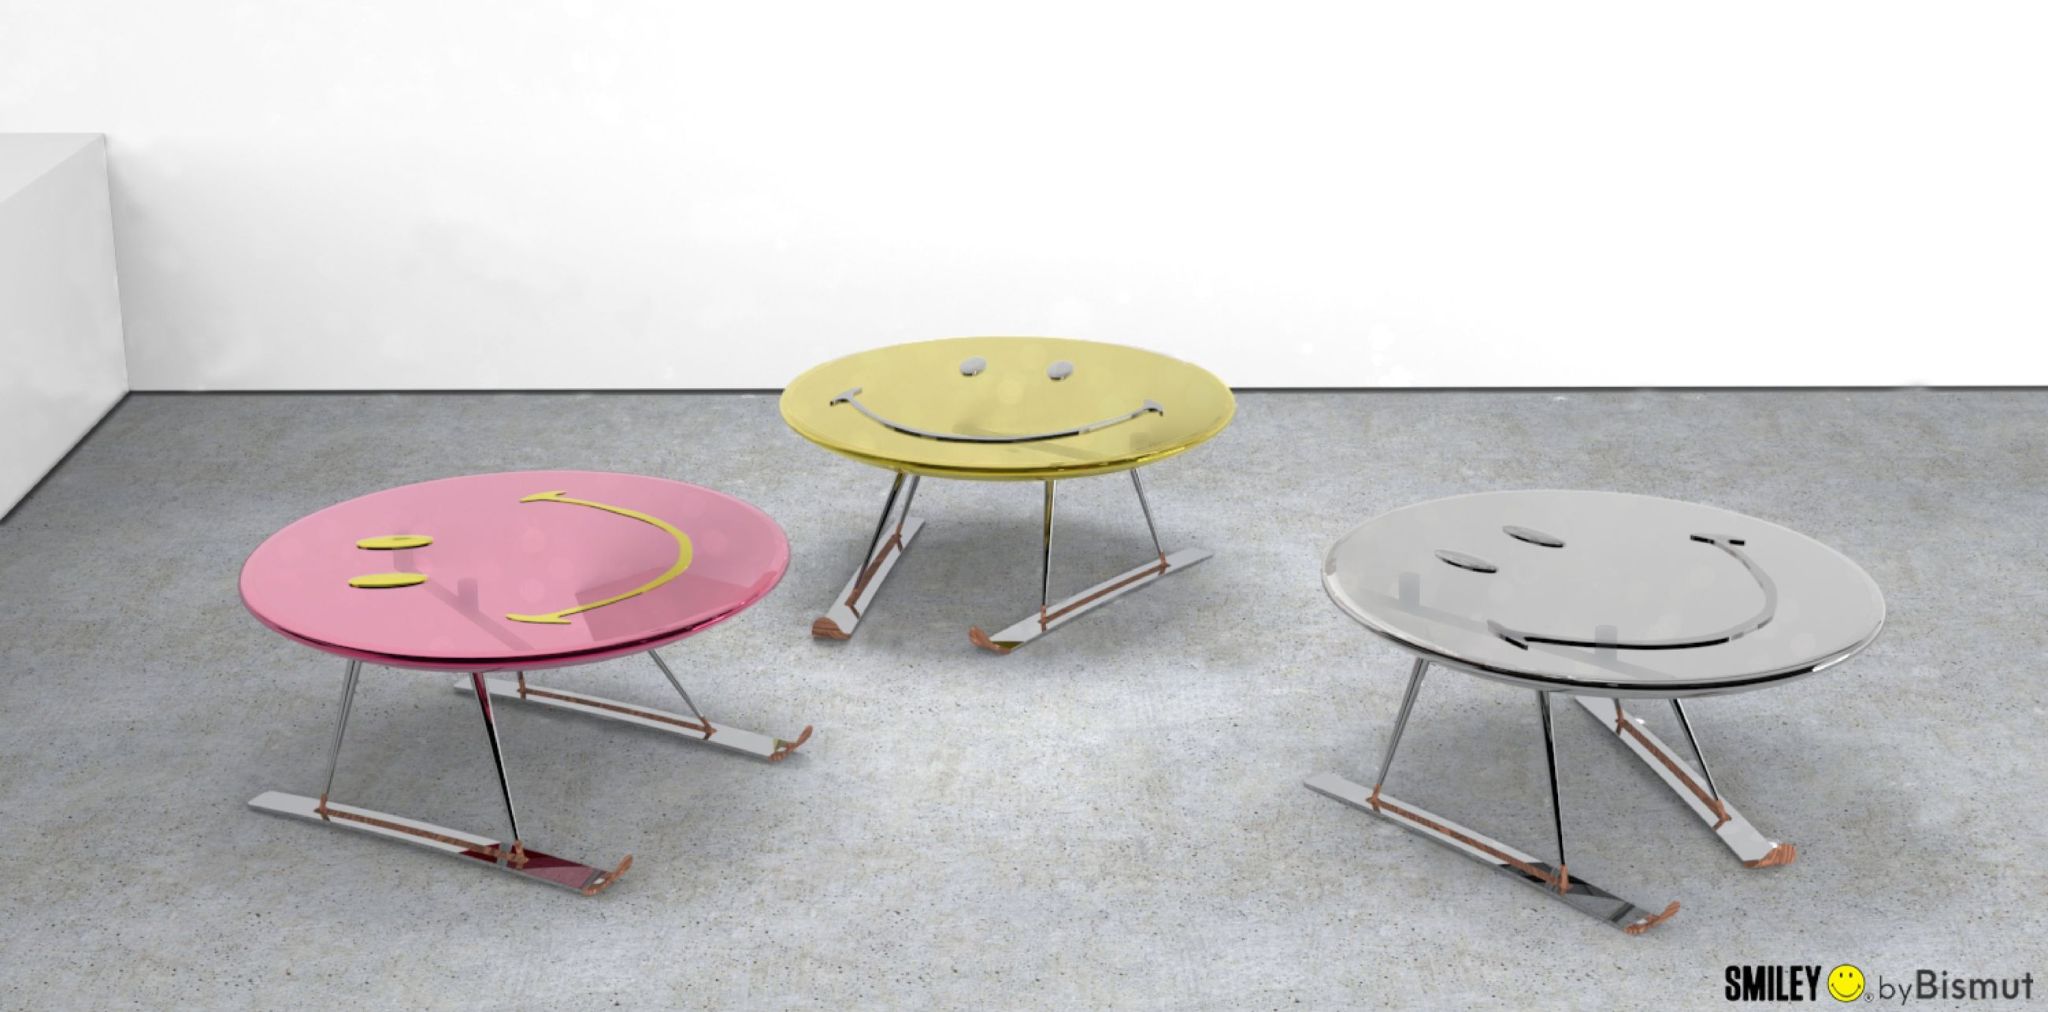 Coffee table models from the Bismut & Bismut x Smiley collaboration. Each table has a Smiley face top balanced on a pair of skis set in parallel or angled in snowplow position and is fashioned from polished stainless steel, with a top available in three colours. The mouth and eyes are made of artisanal glass, while the upturned ski tips are in chestnut. 